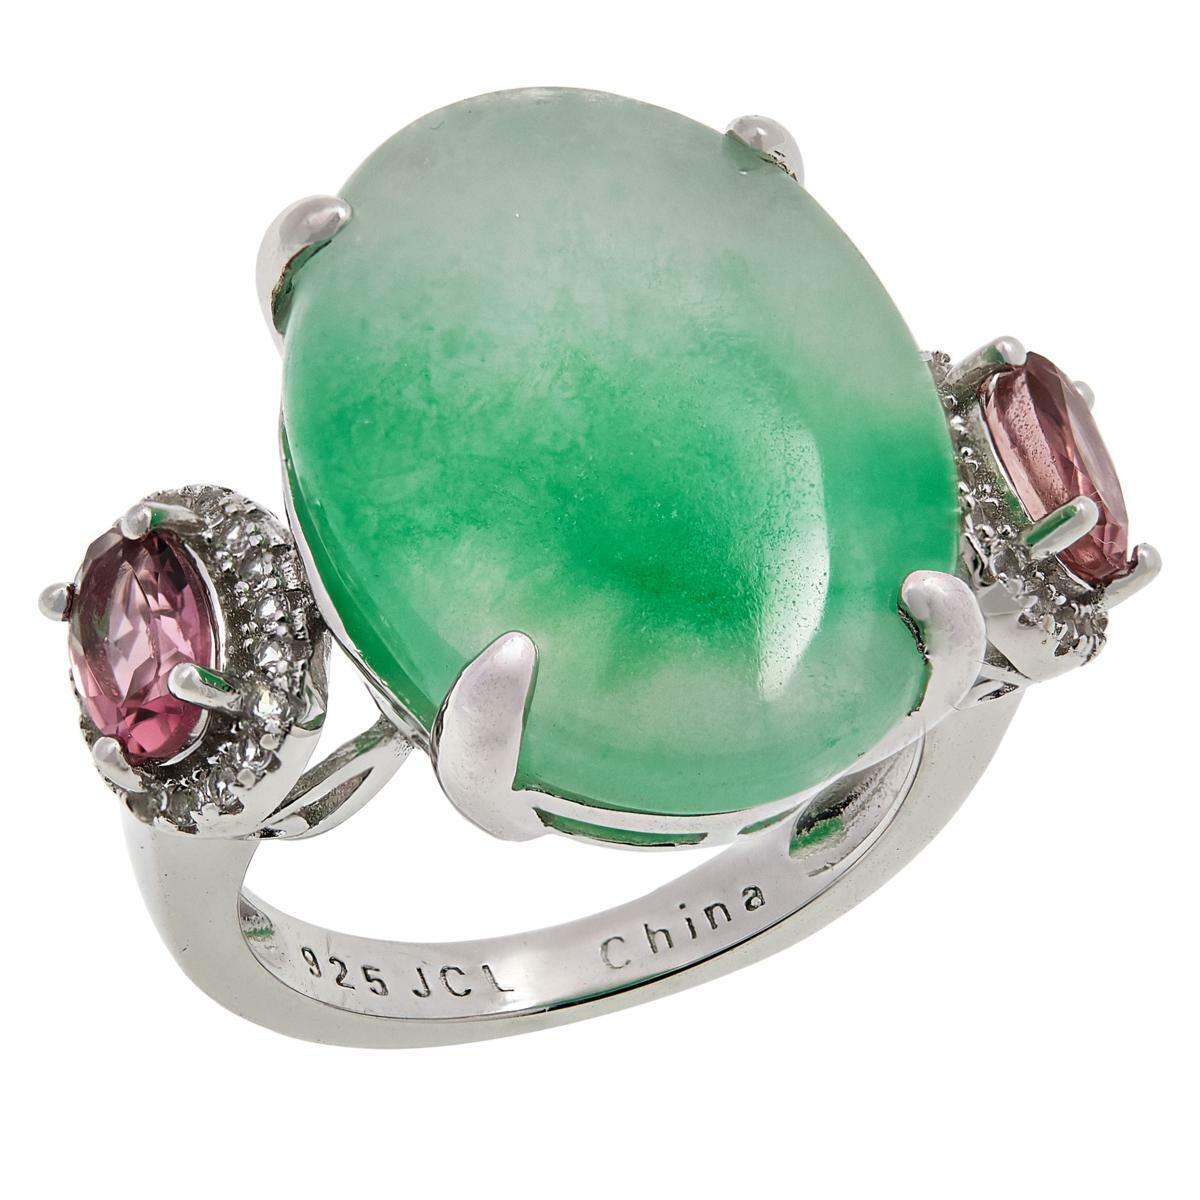 Colleen Lopez Sterling Silver Jade, Pink Tourmaline & White Topaz Ring, Size 6